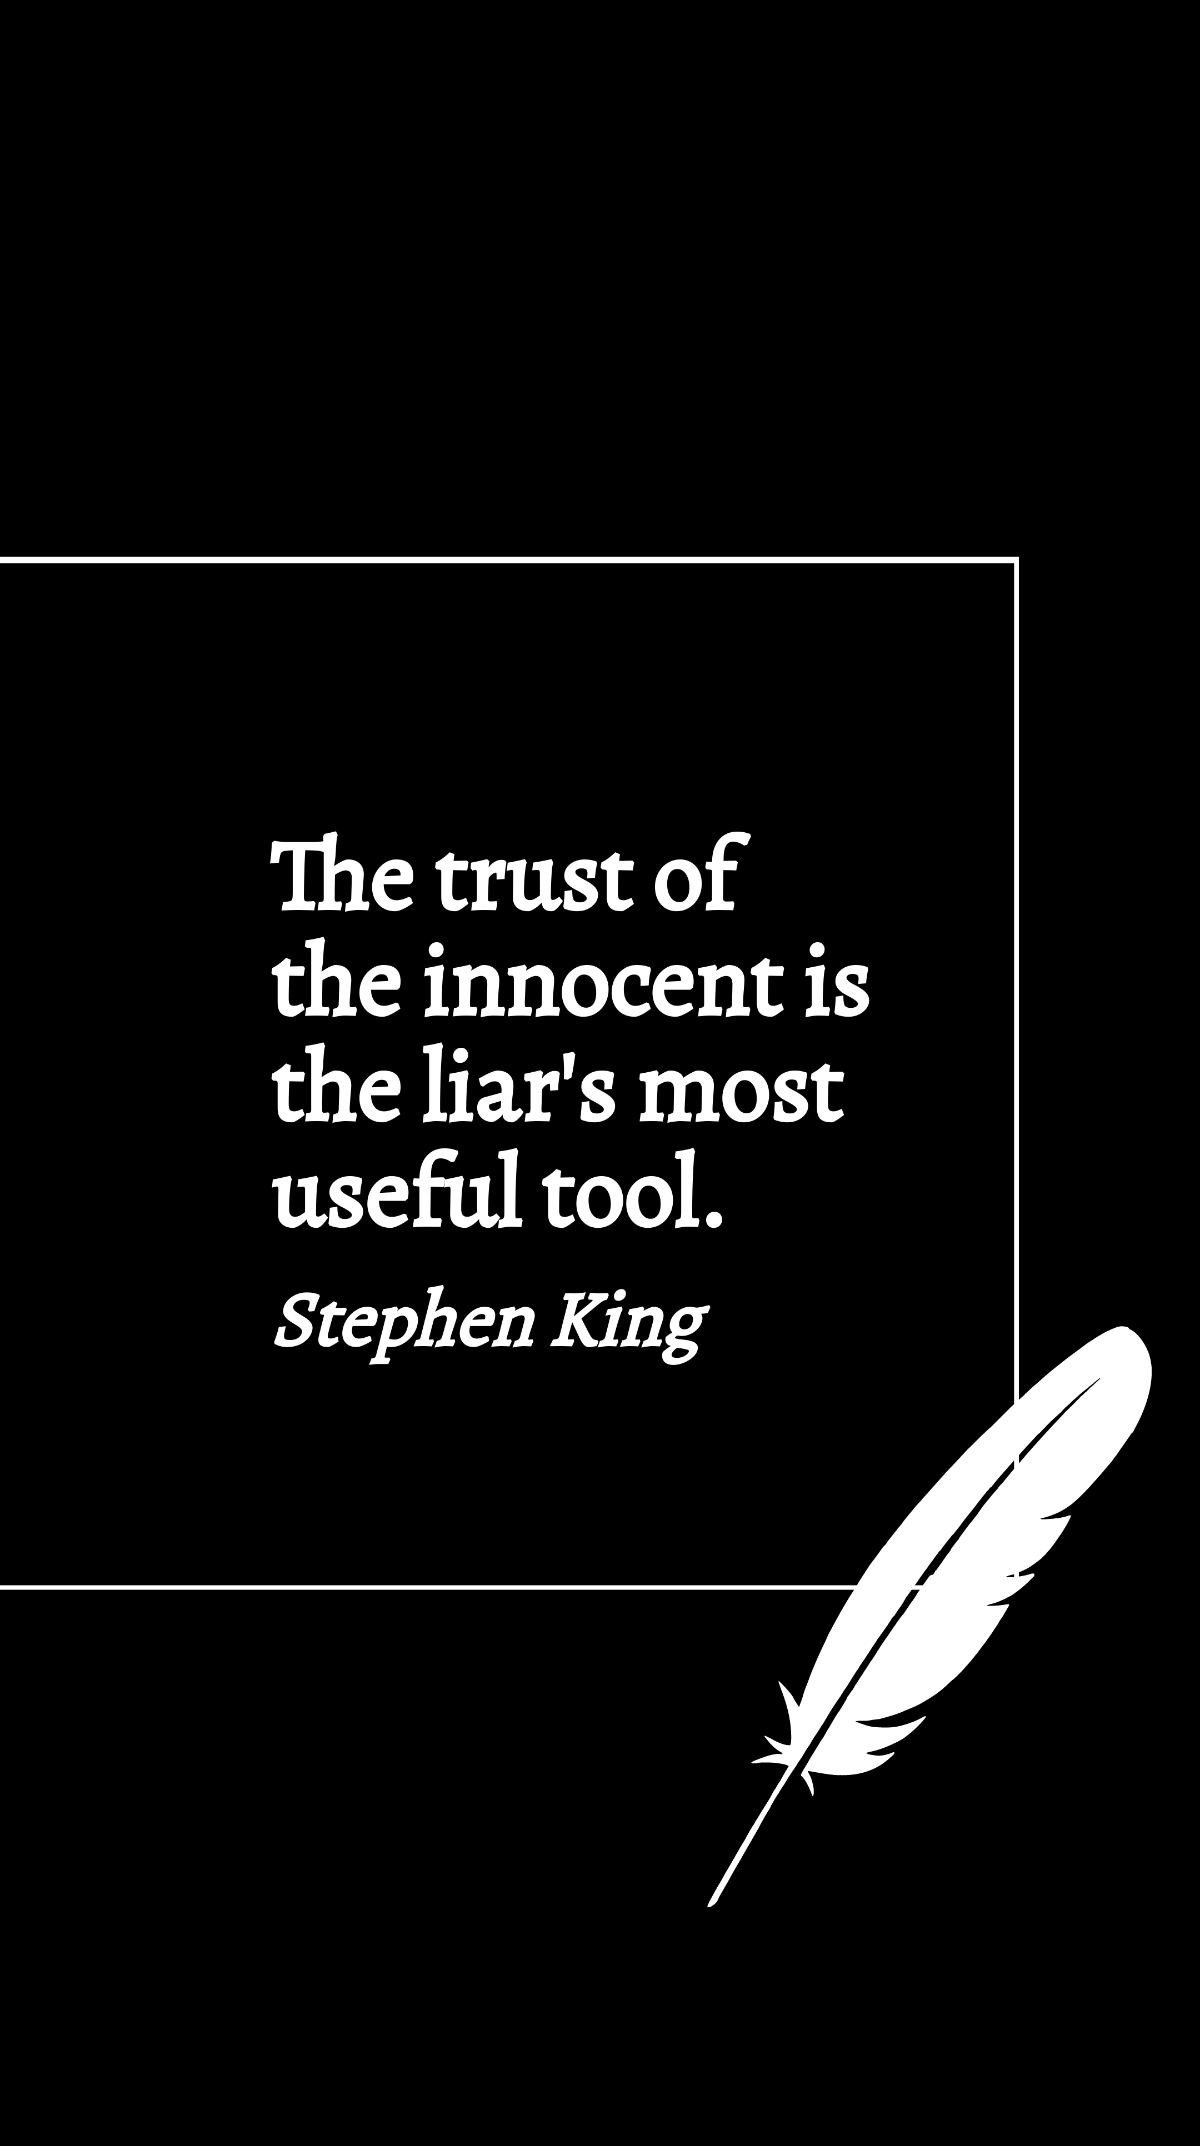 Stephen King - The trust of the innocent is the liar's most useful tool. Template